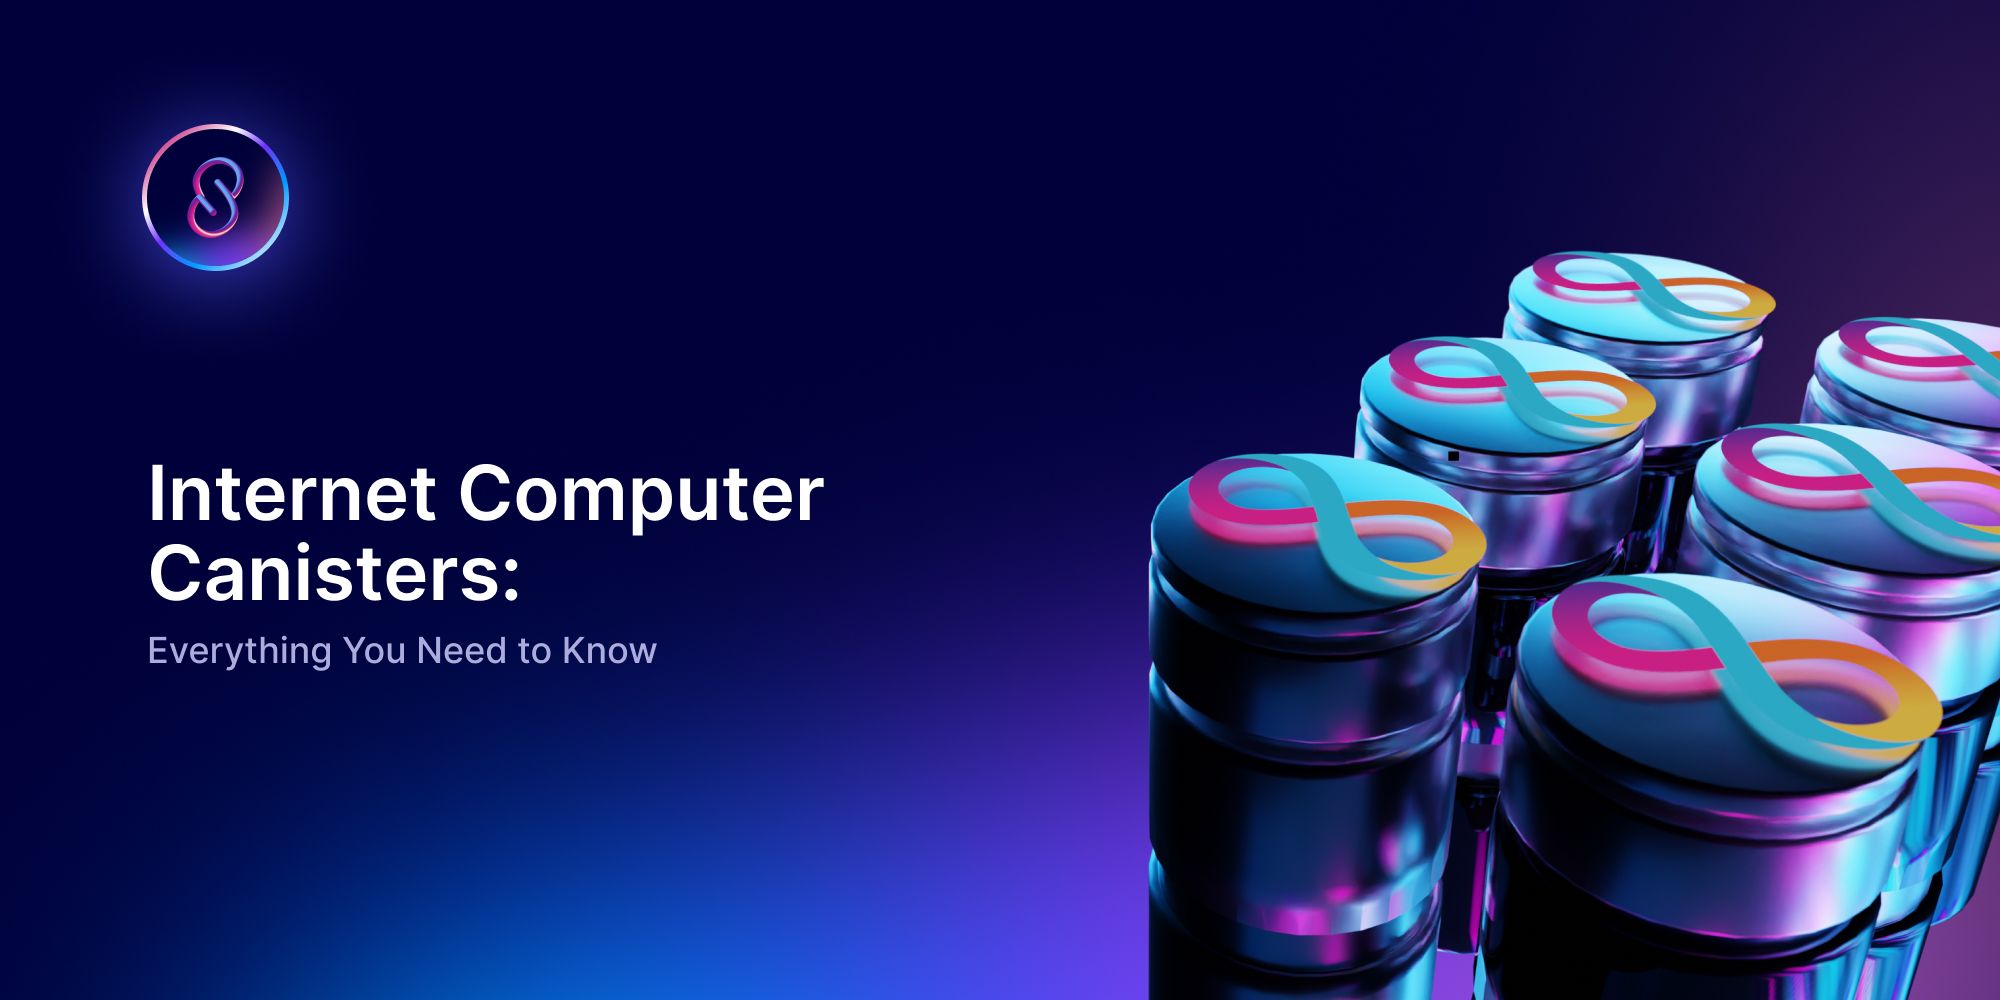 Internet Computer Canisters: Everything You Need to Know